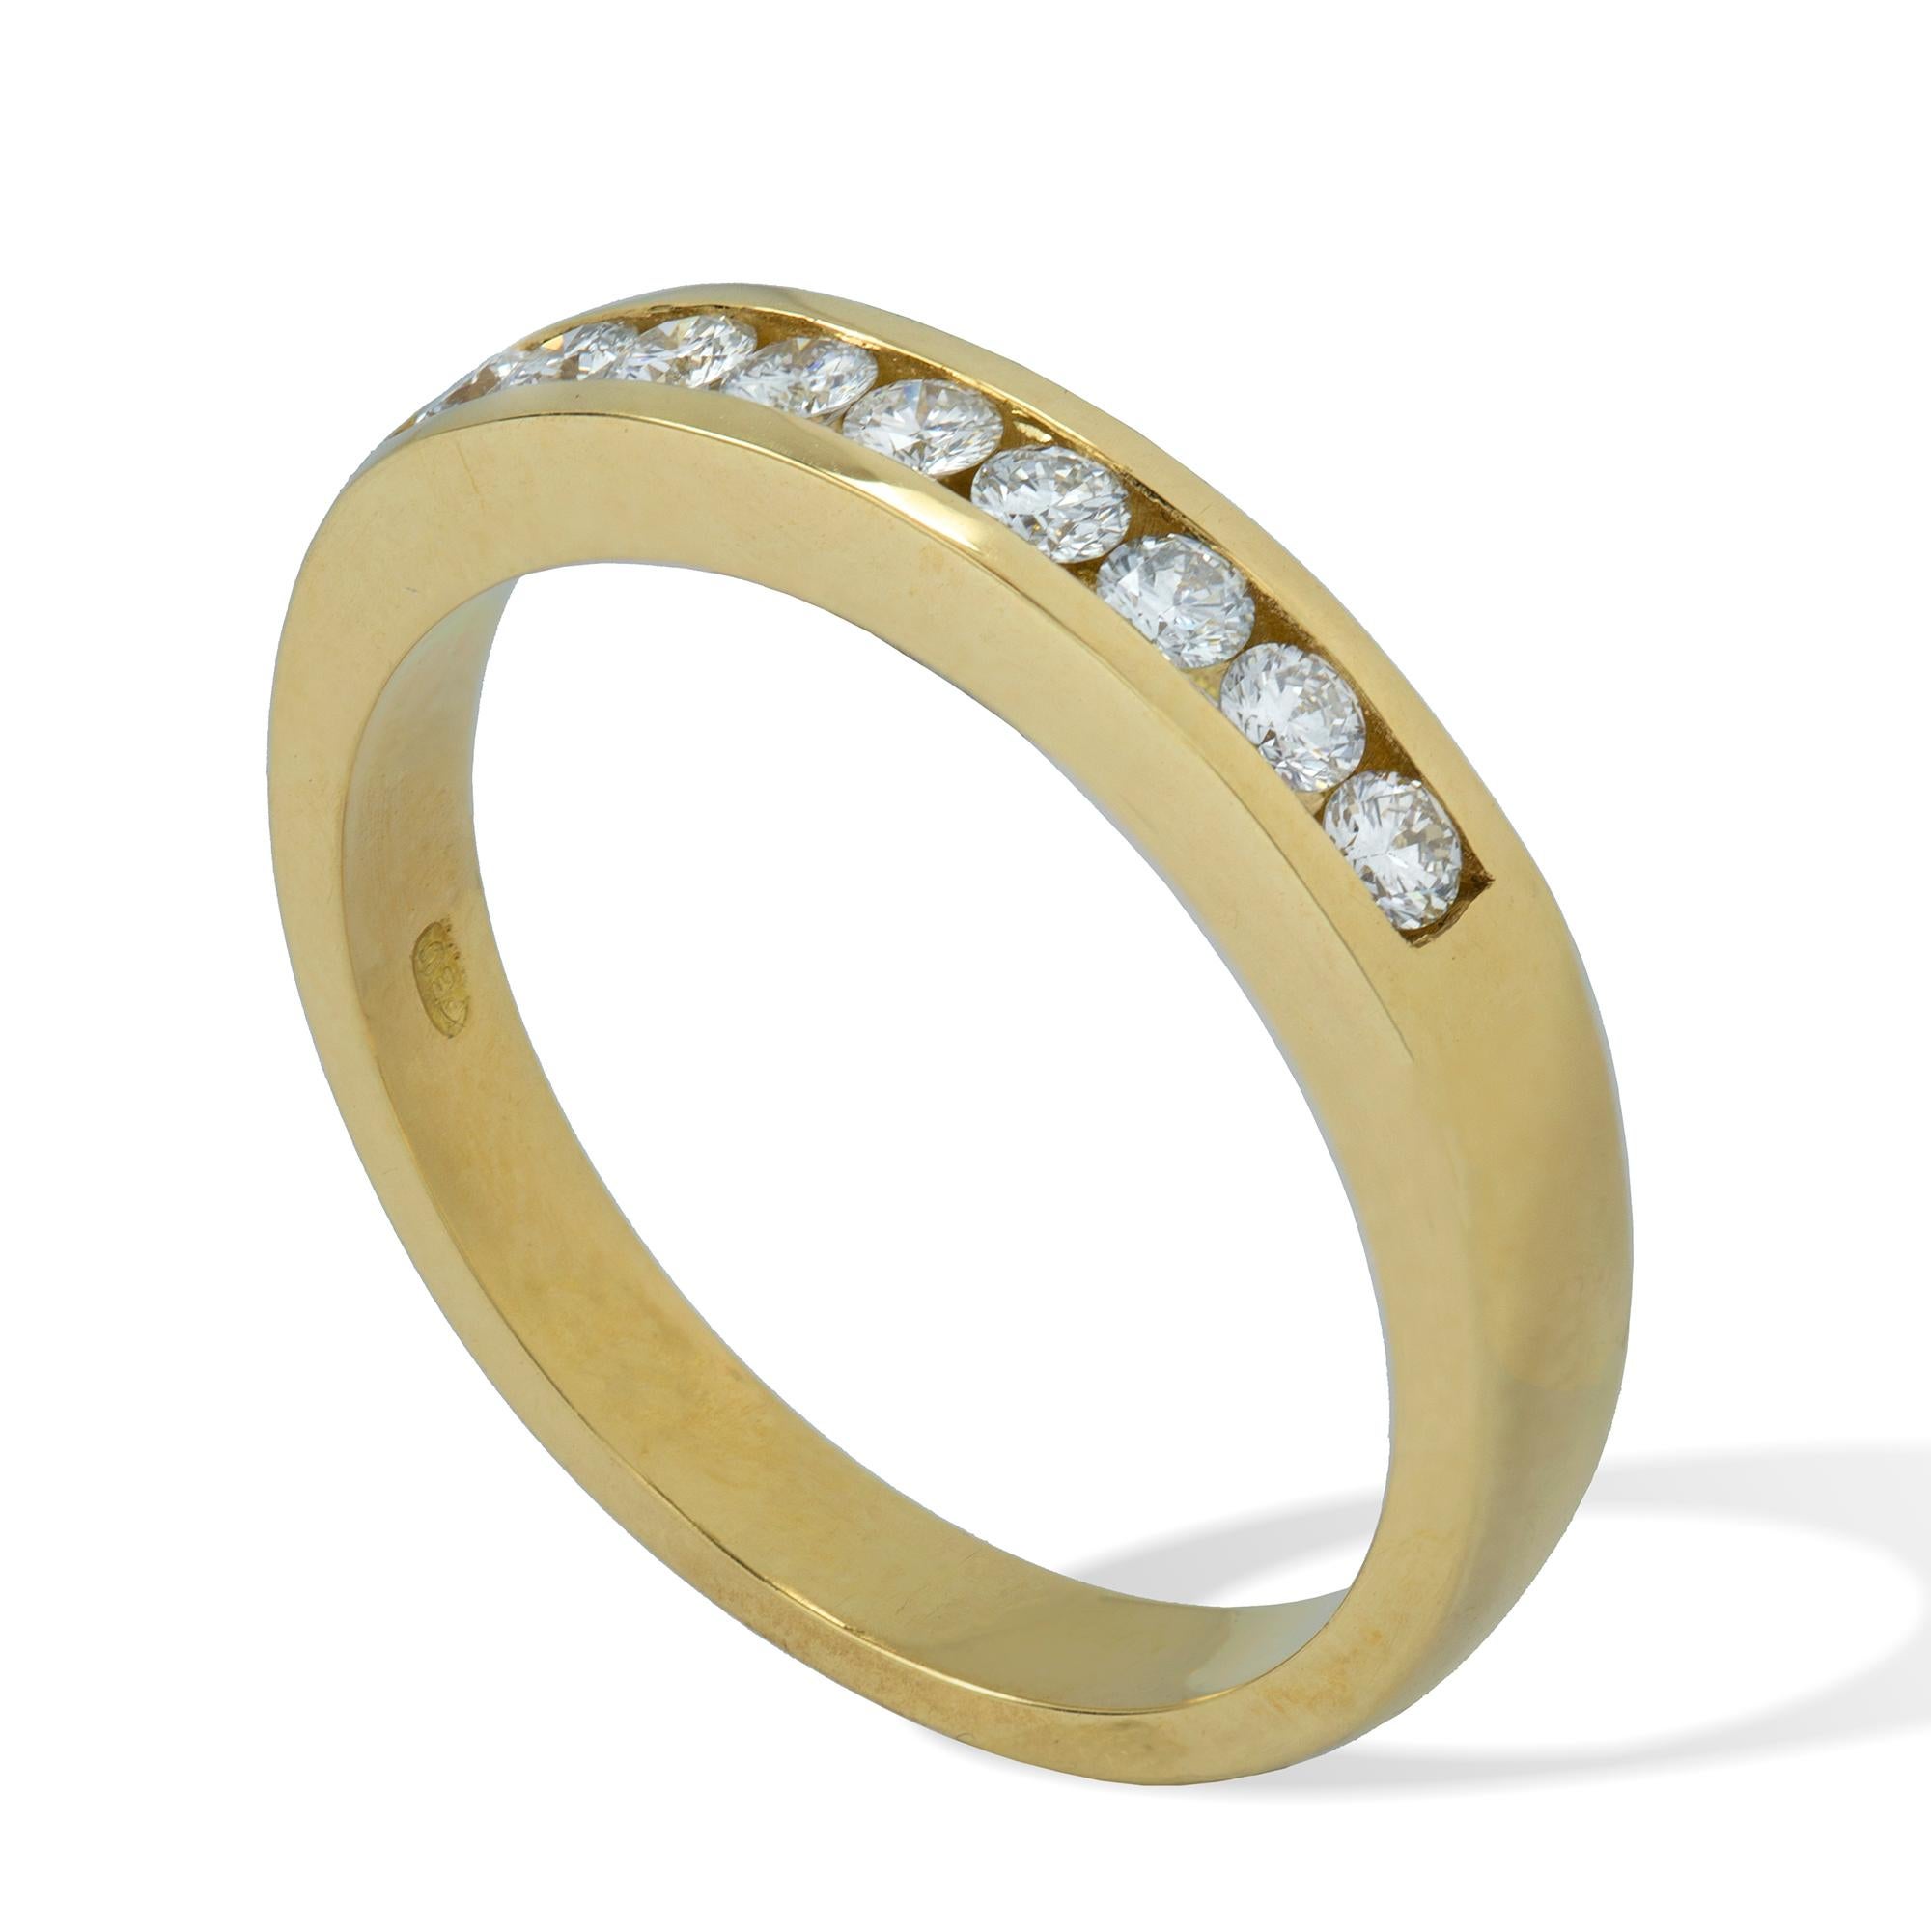 A yellow gold half eternity ring, set with nine round brilliant cut diamonds weighing 0.30 carat in total set in channel set, hallmarked 18ct gold, London 2019, measuring approximately 0.3cm wide, finger size N1/2,  gross weight 3.6 grams. 

This